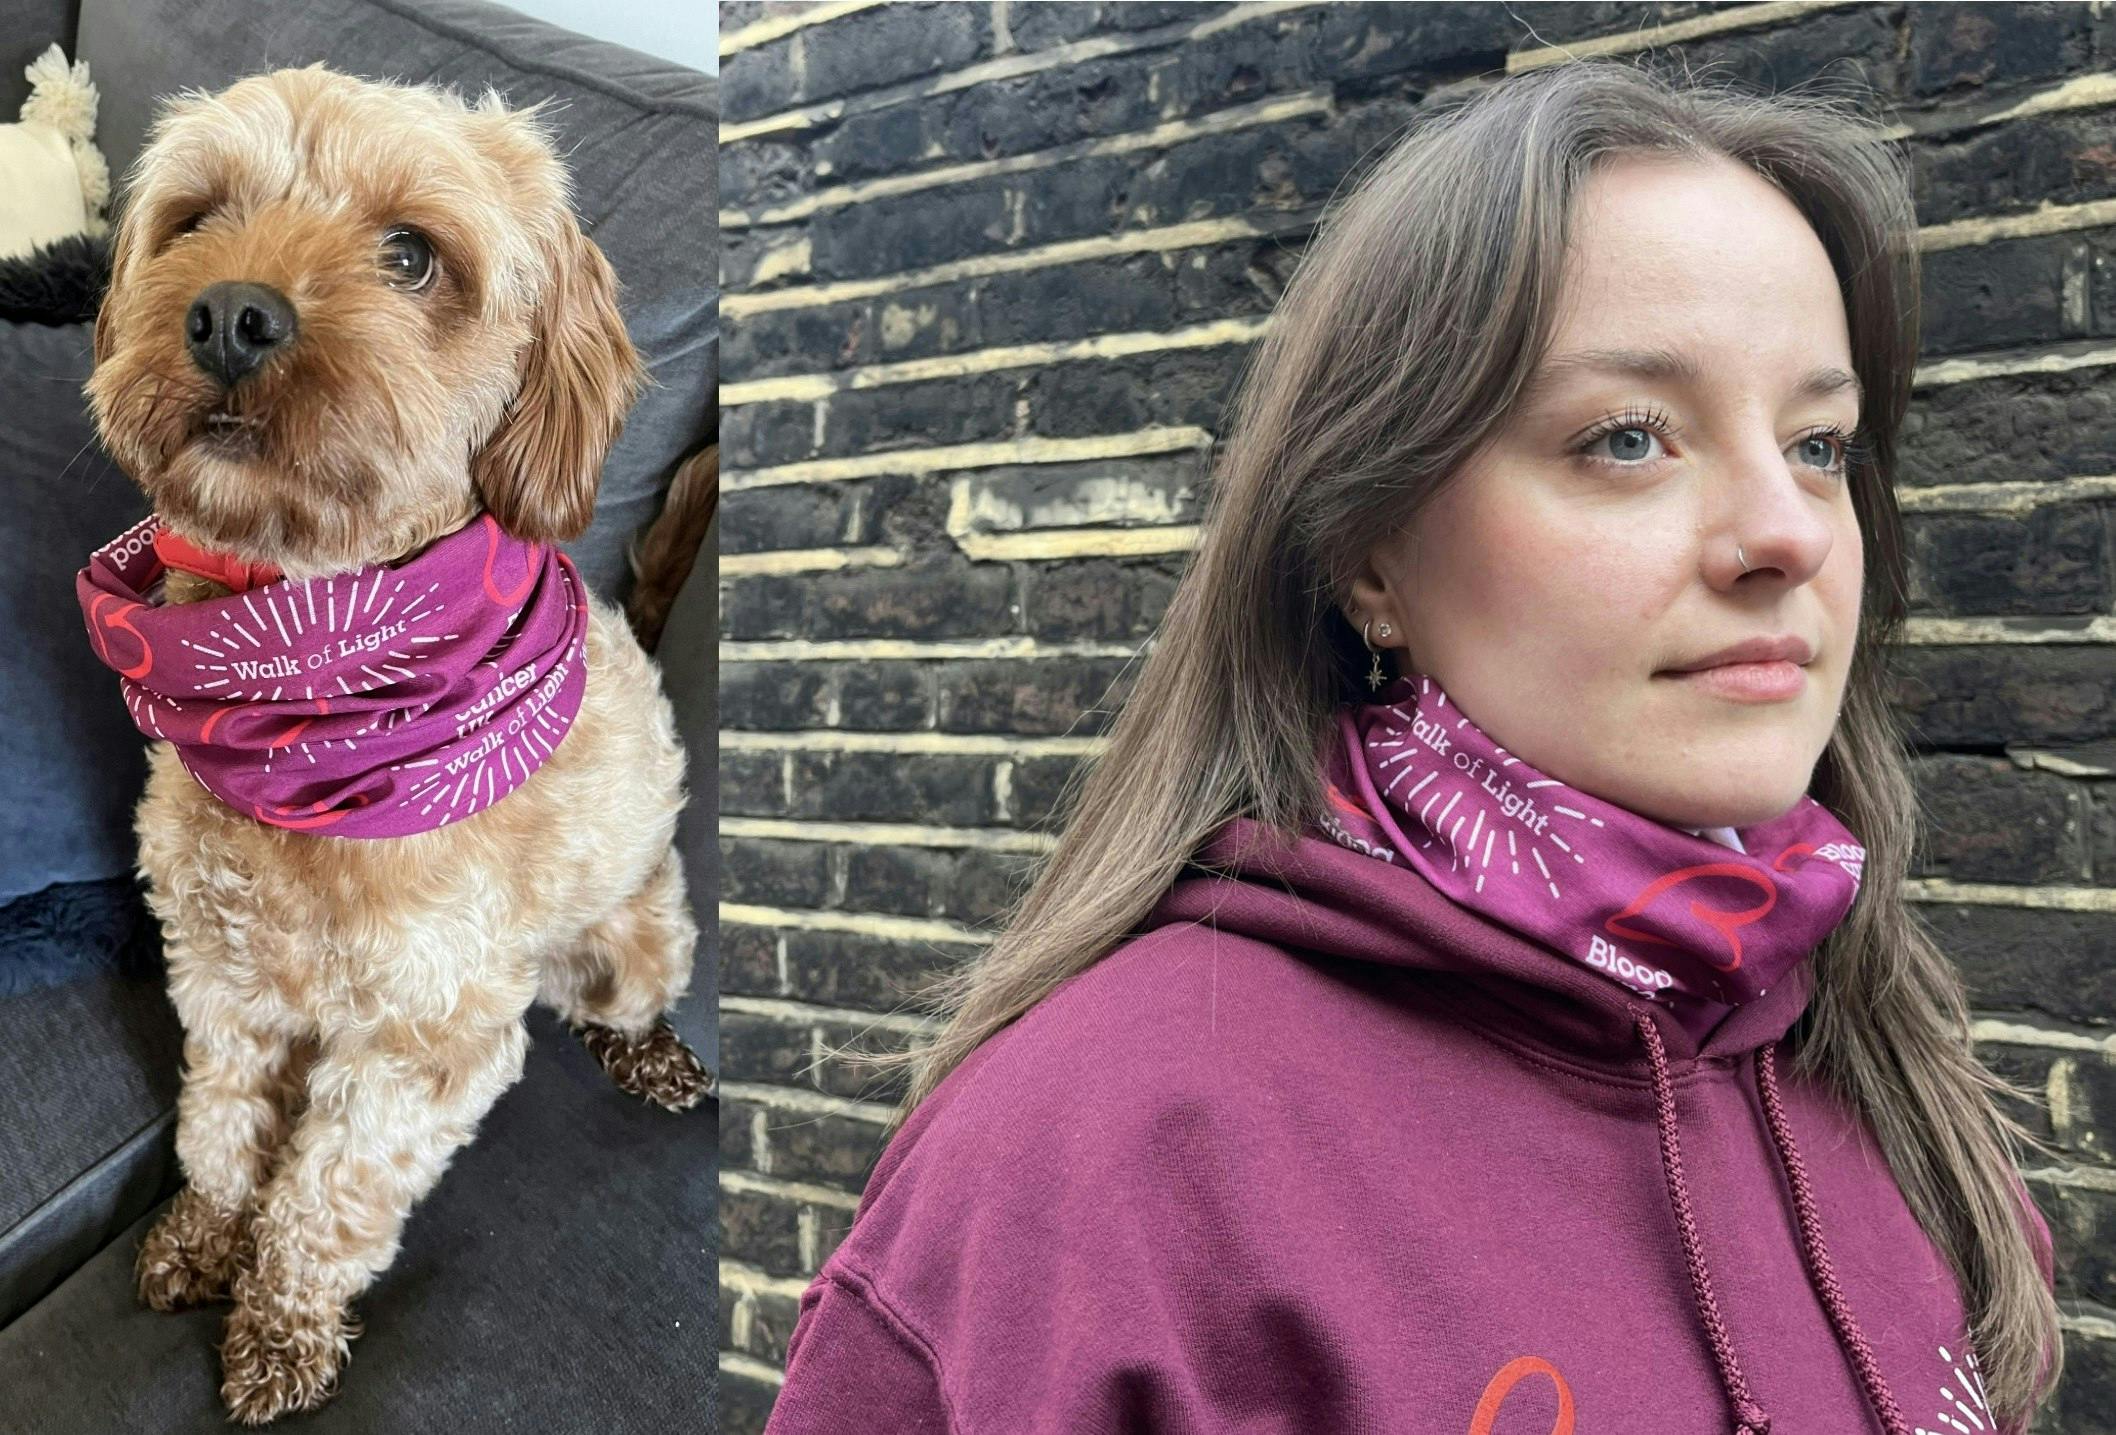 A woman wearing her Walk of Light neck warmer and hoodies standing by a wall. A dog wearing a Walk of Light neck warmer.